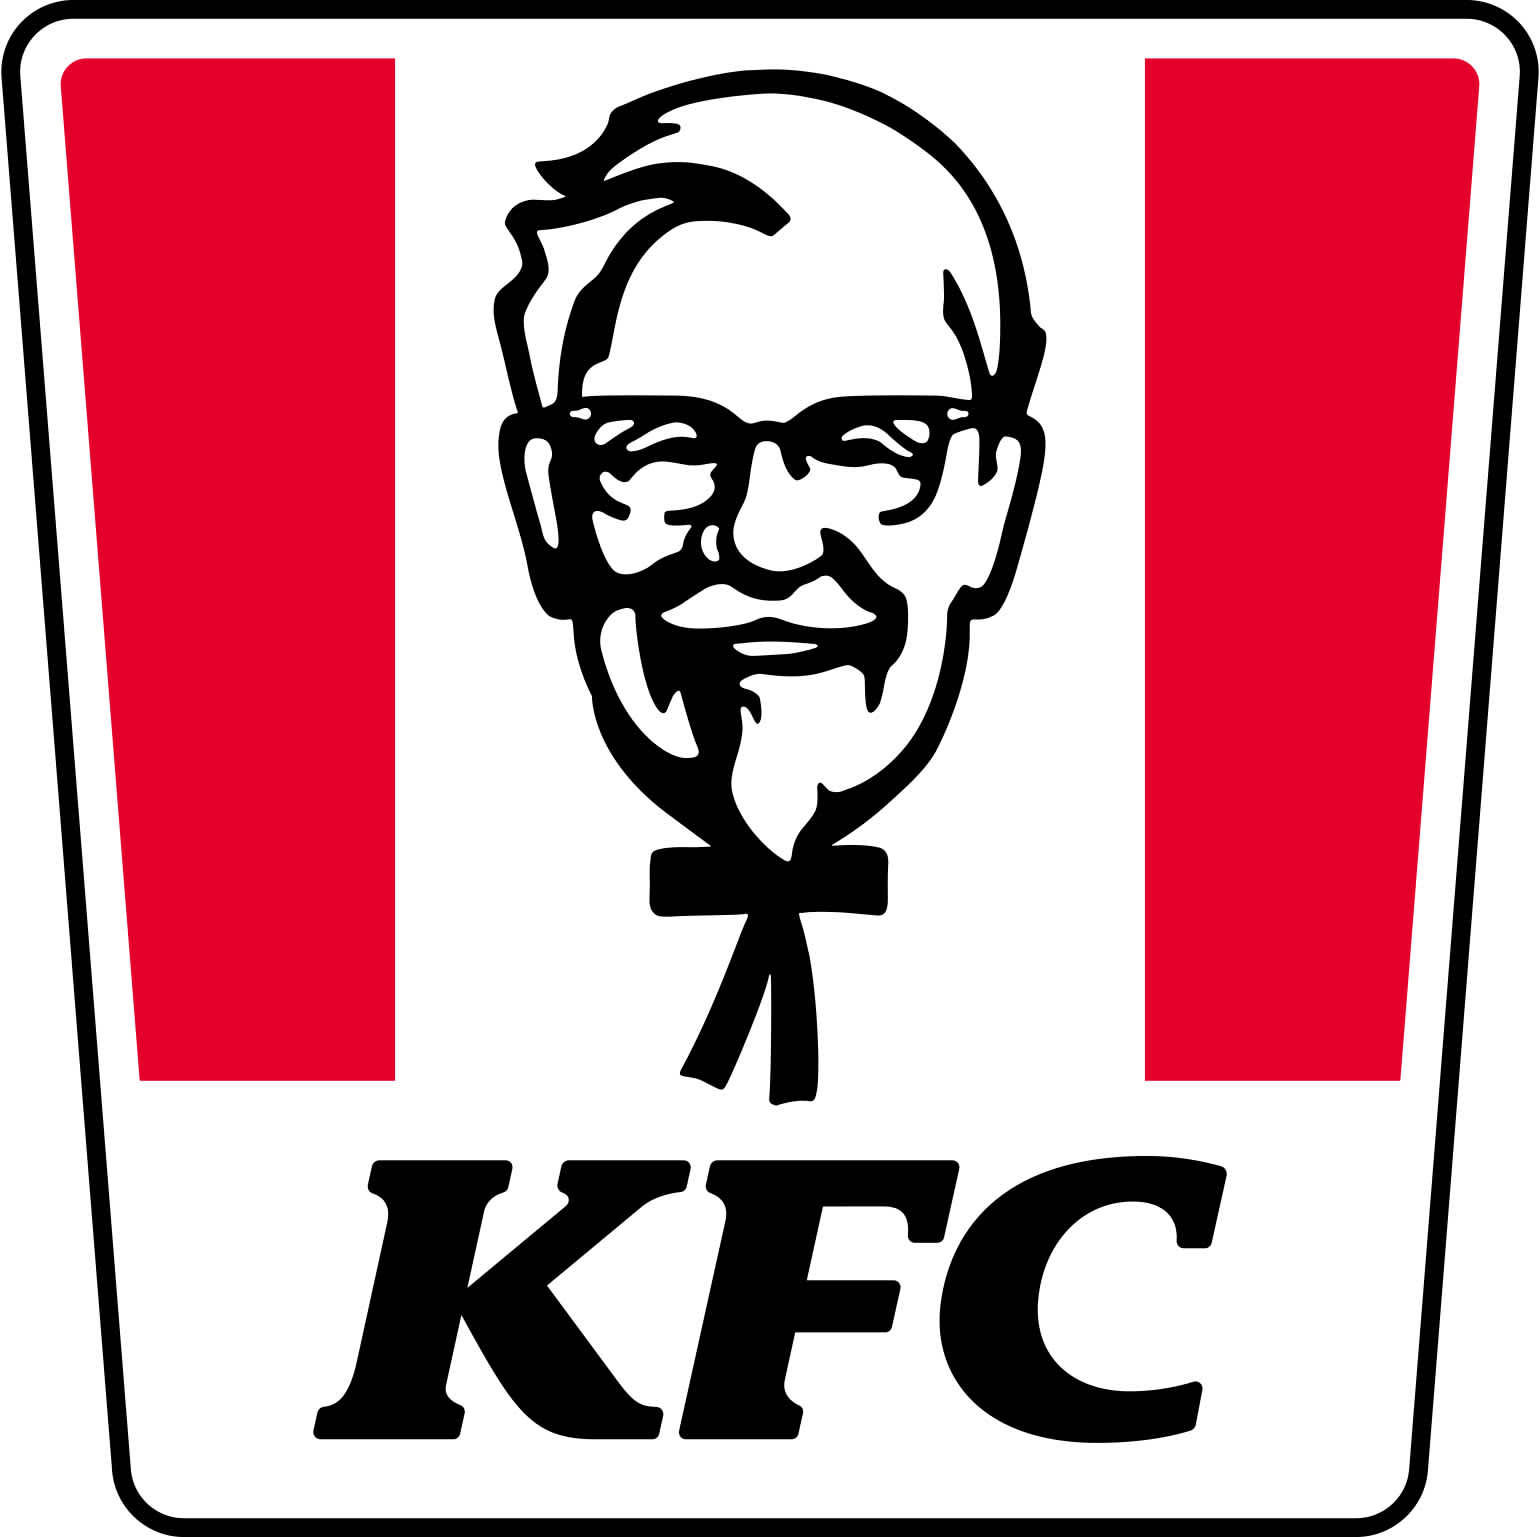 THE FIRST VEGETARIAN KFC IN THE WORLD IS IN THE NETHERLANDS